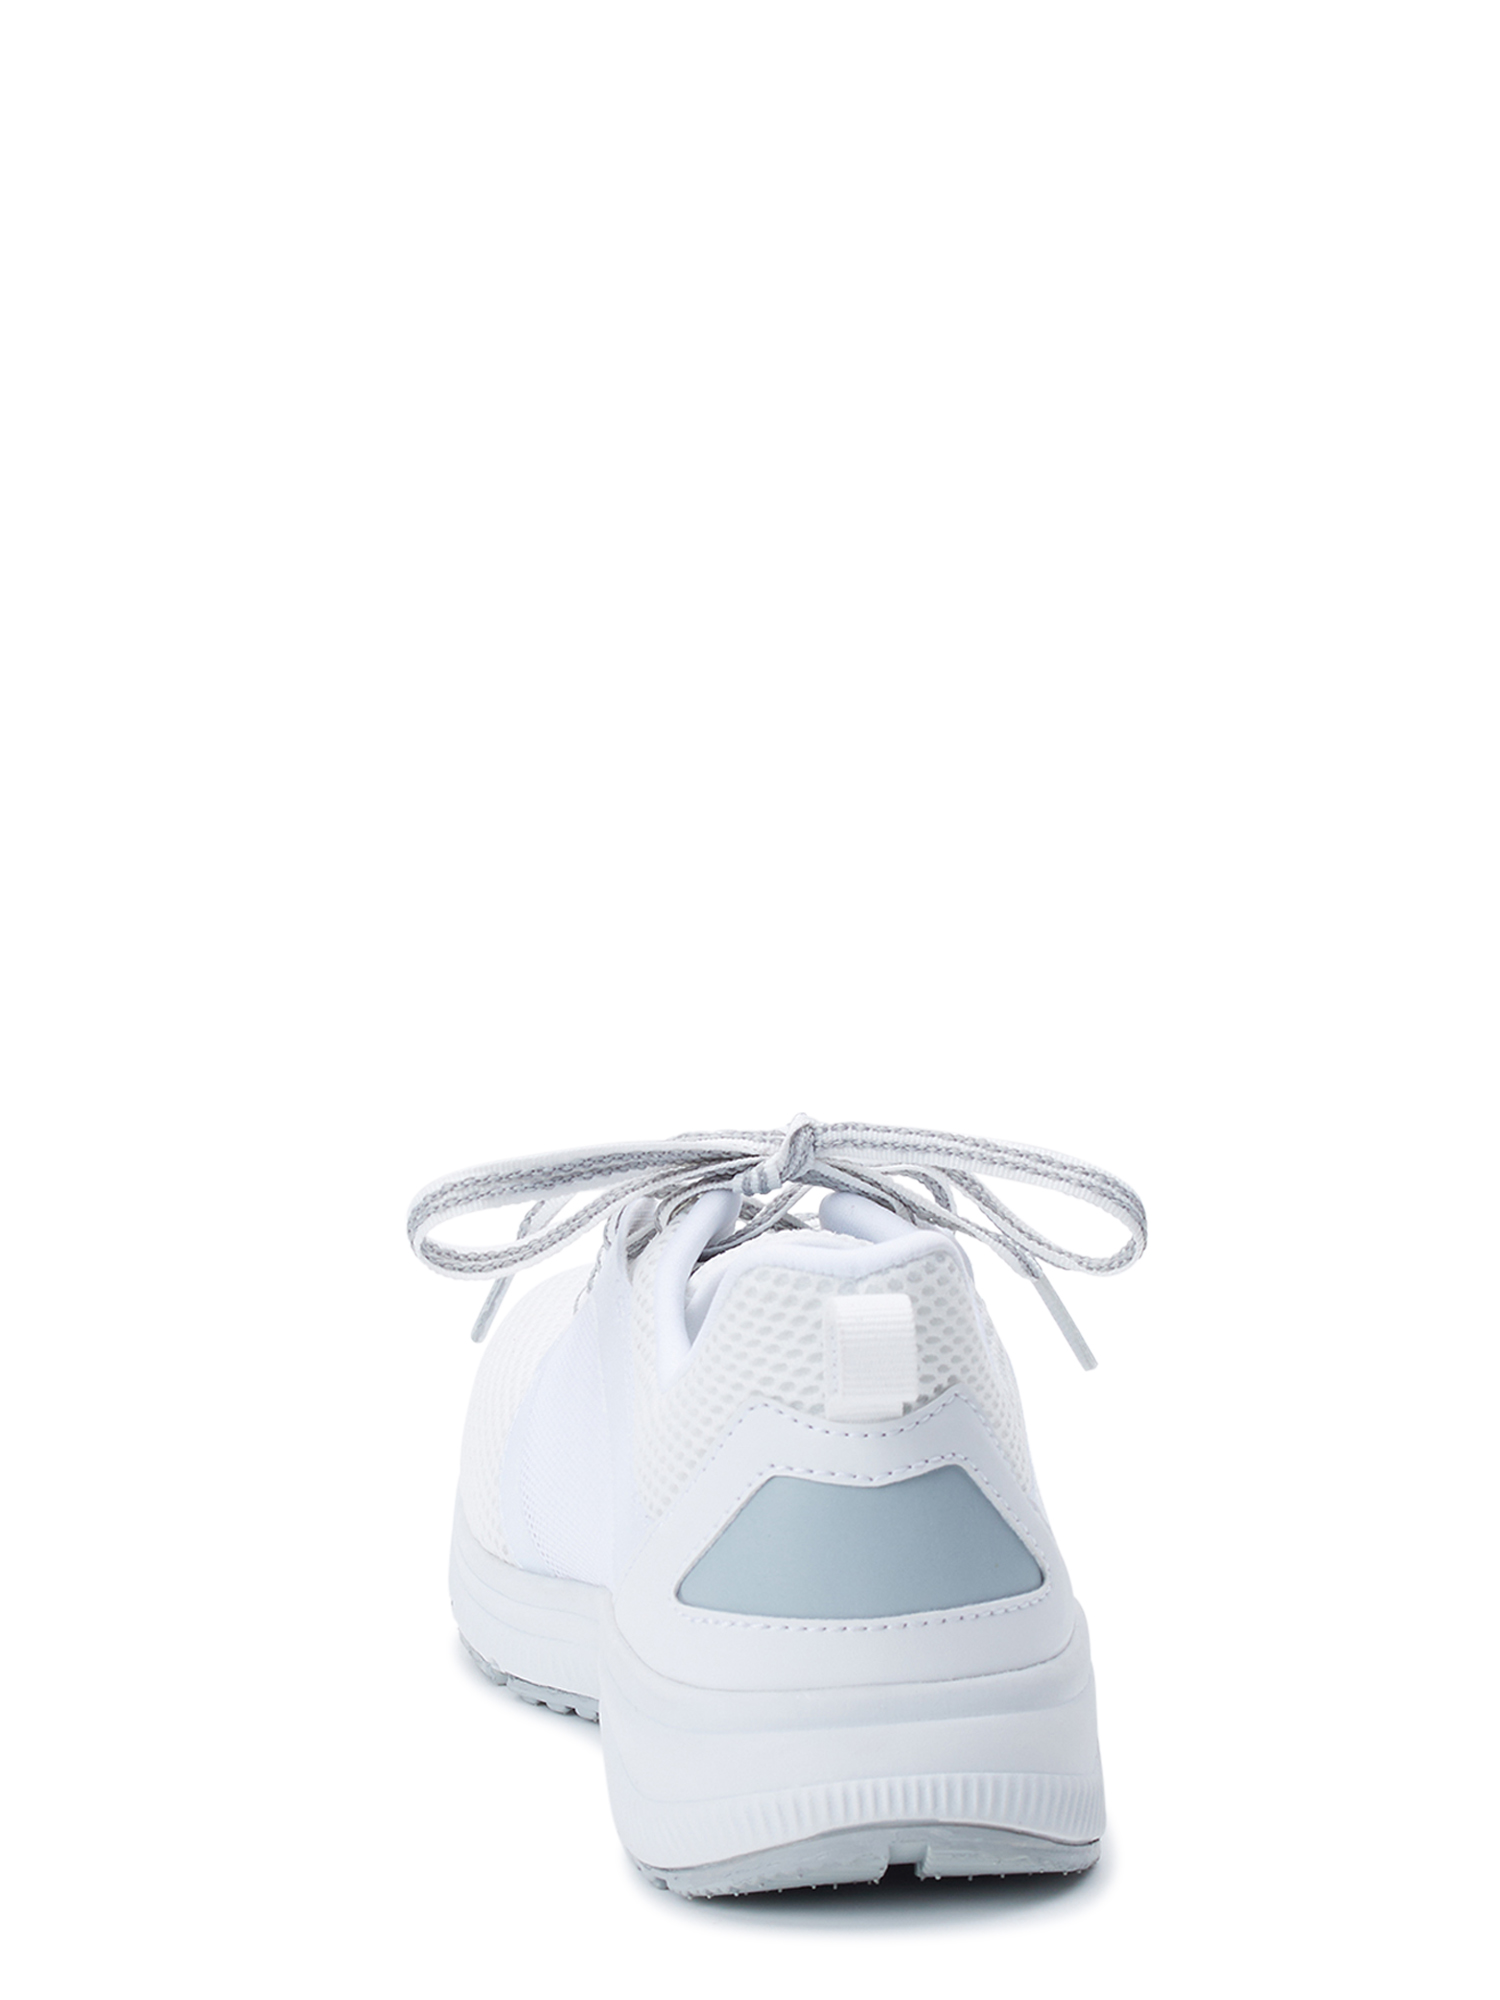 Avia Women's Deluxe Athletic Sneaker, Wide Width Available - image 2 of 5